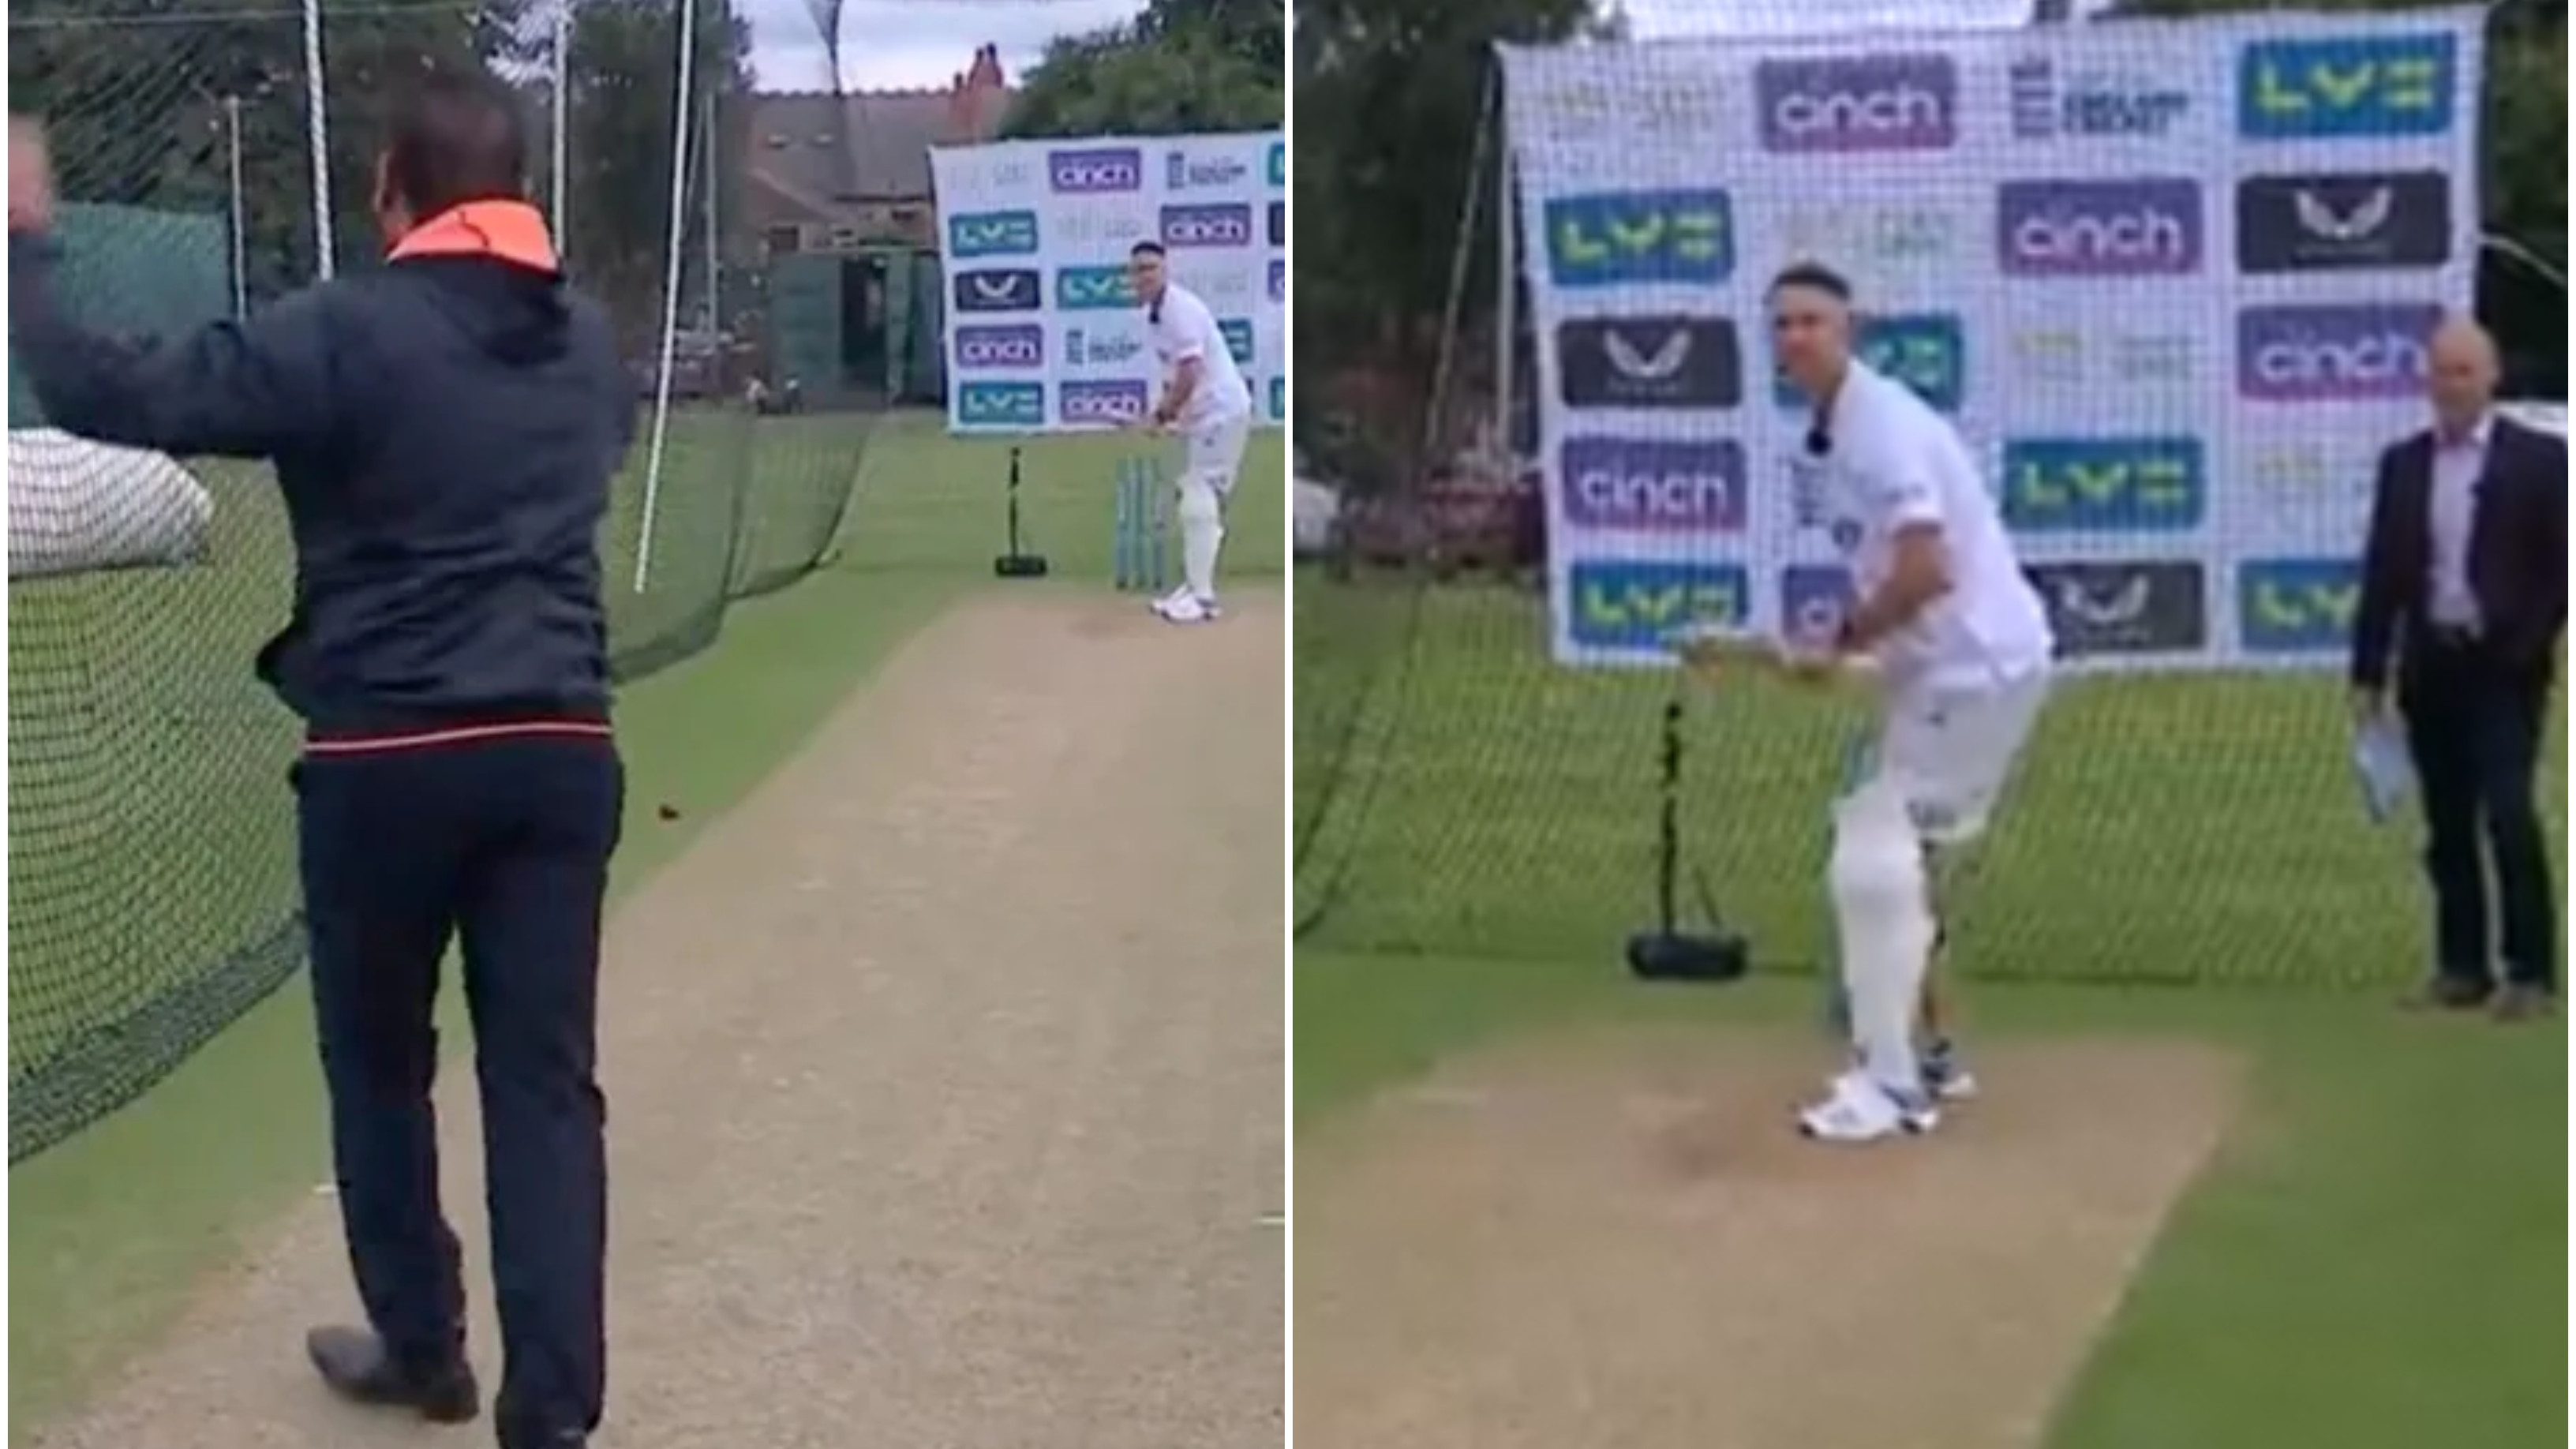 ENG v IND 2022: WATCH – Shastri bowls to Pietersen in nets as latter shares masterclass on how to play spin